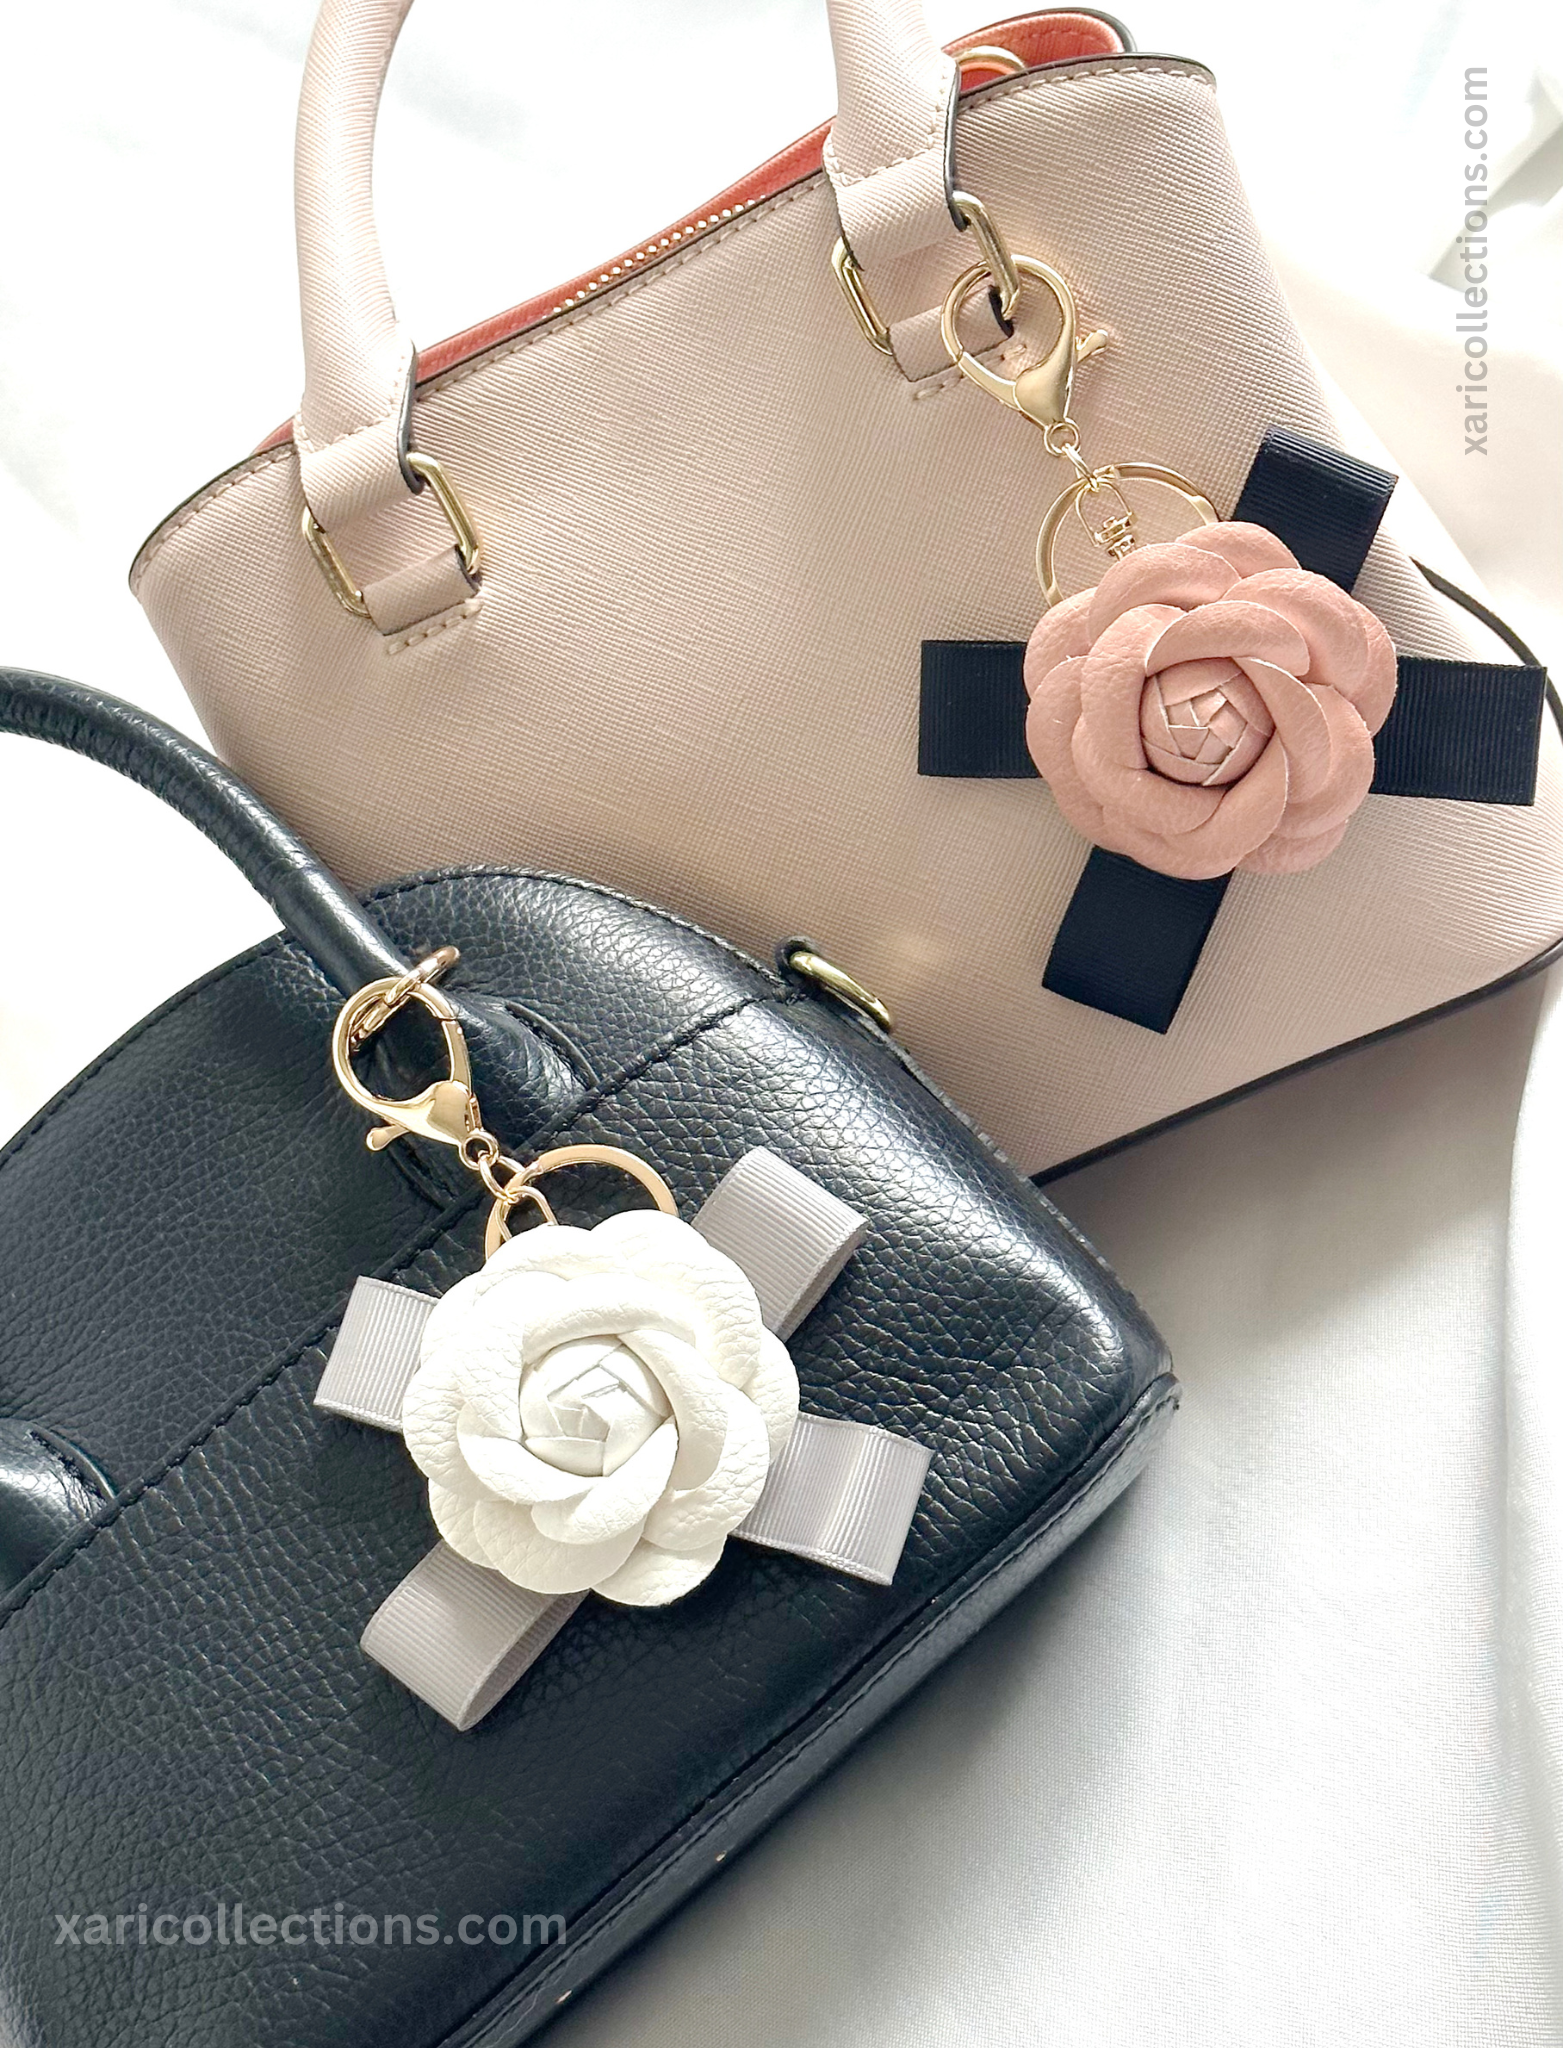 Chanel Style Camellia Flower Charms Silver Chain Link Bag Charm